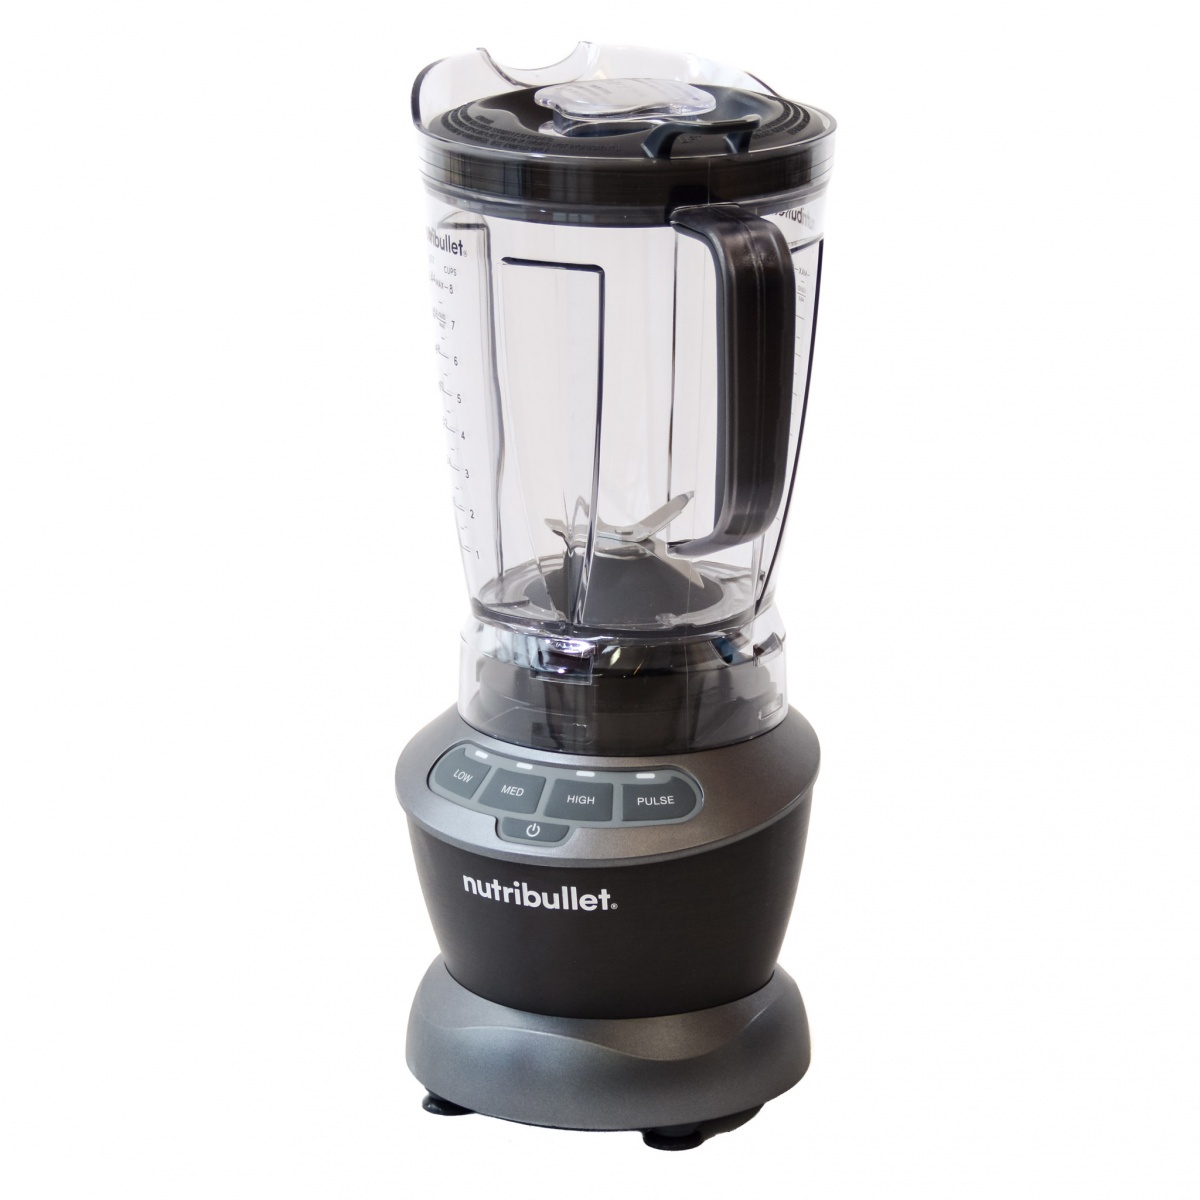 Ready steady, shake: Nutribullet and its rivals tested